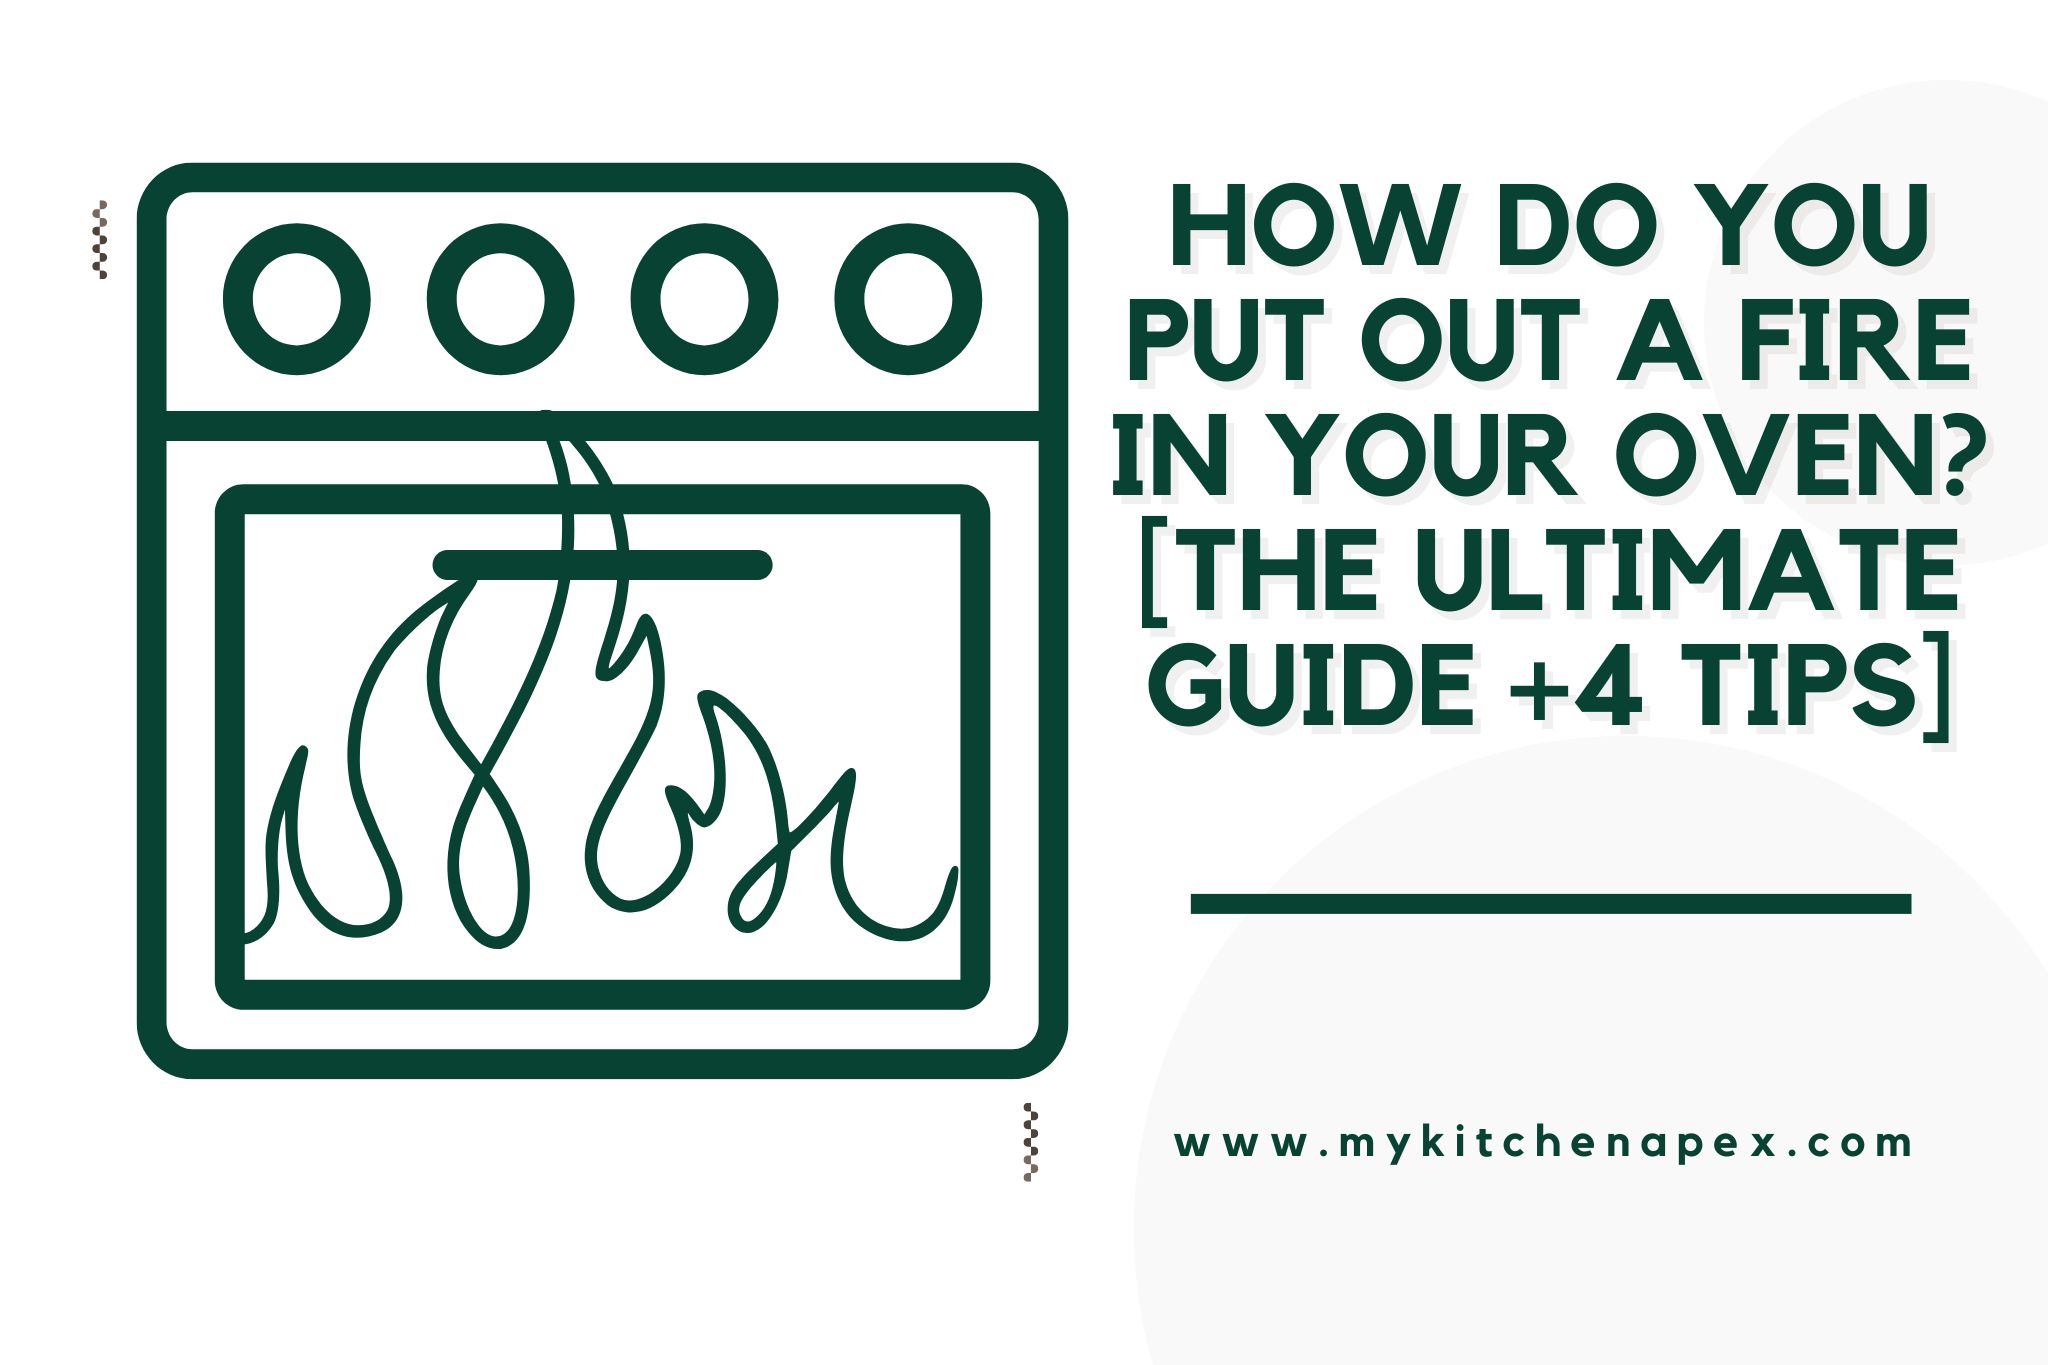 How Do You Put Out A Fire In Your Oven? [The ULTIMATE Guide +4 Tips]